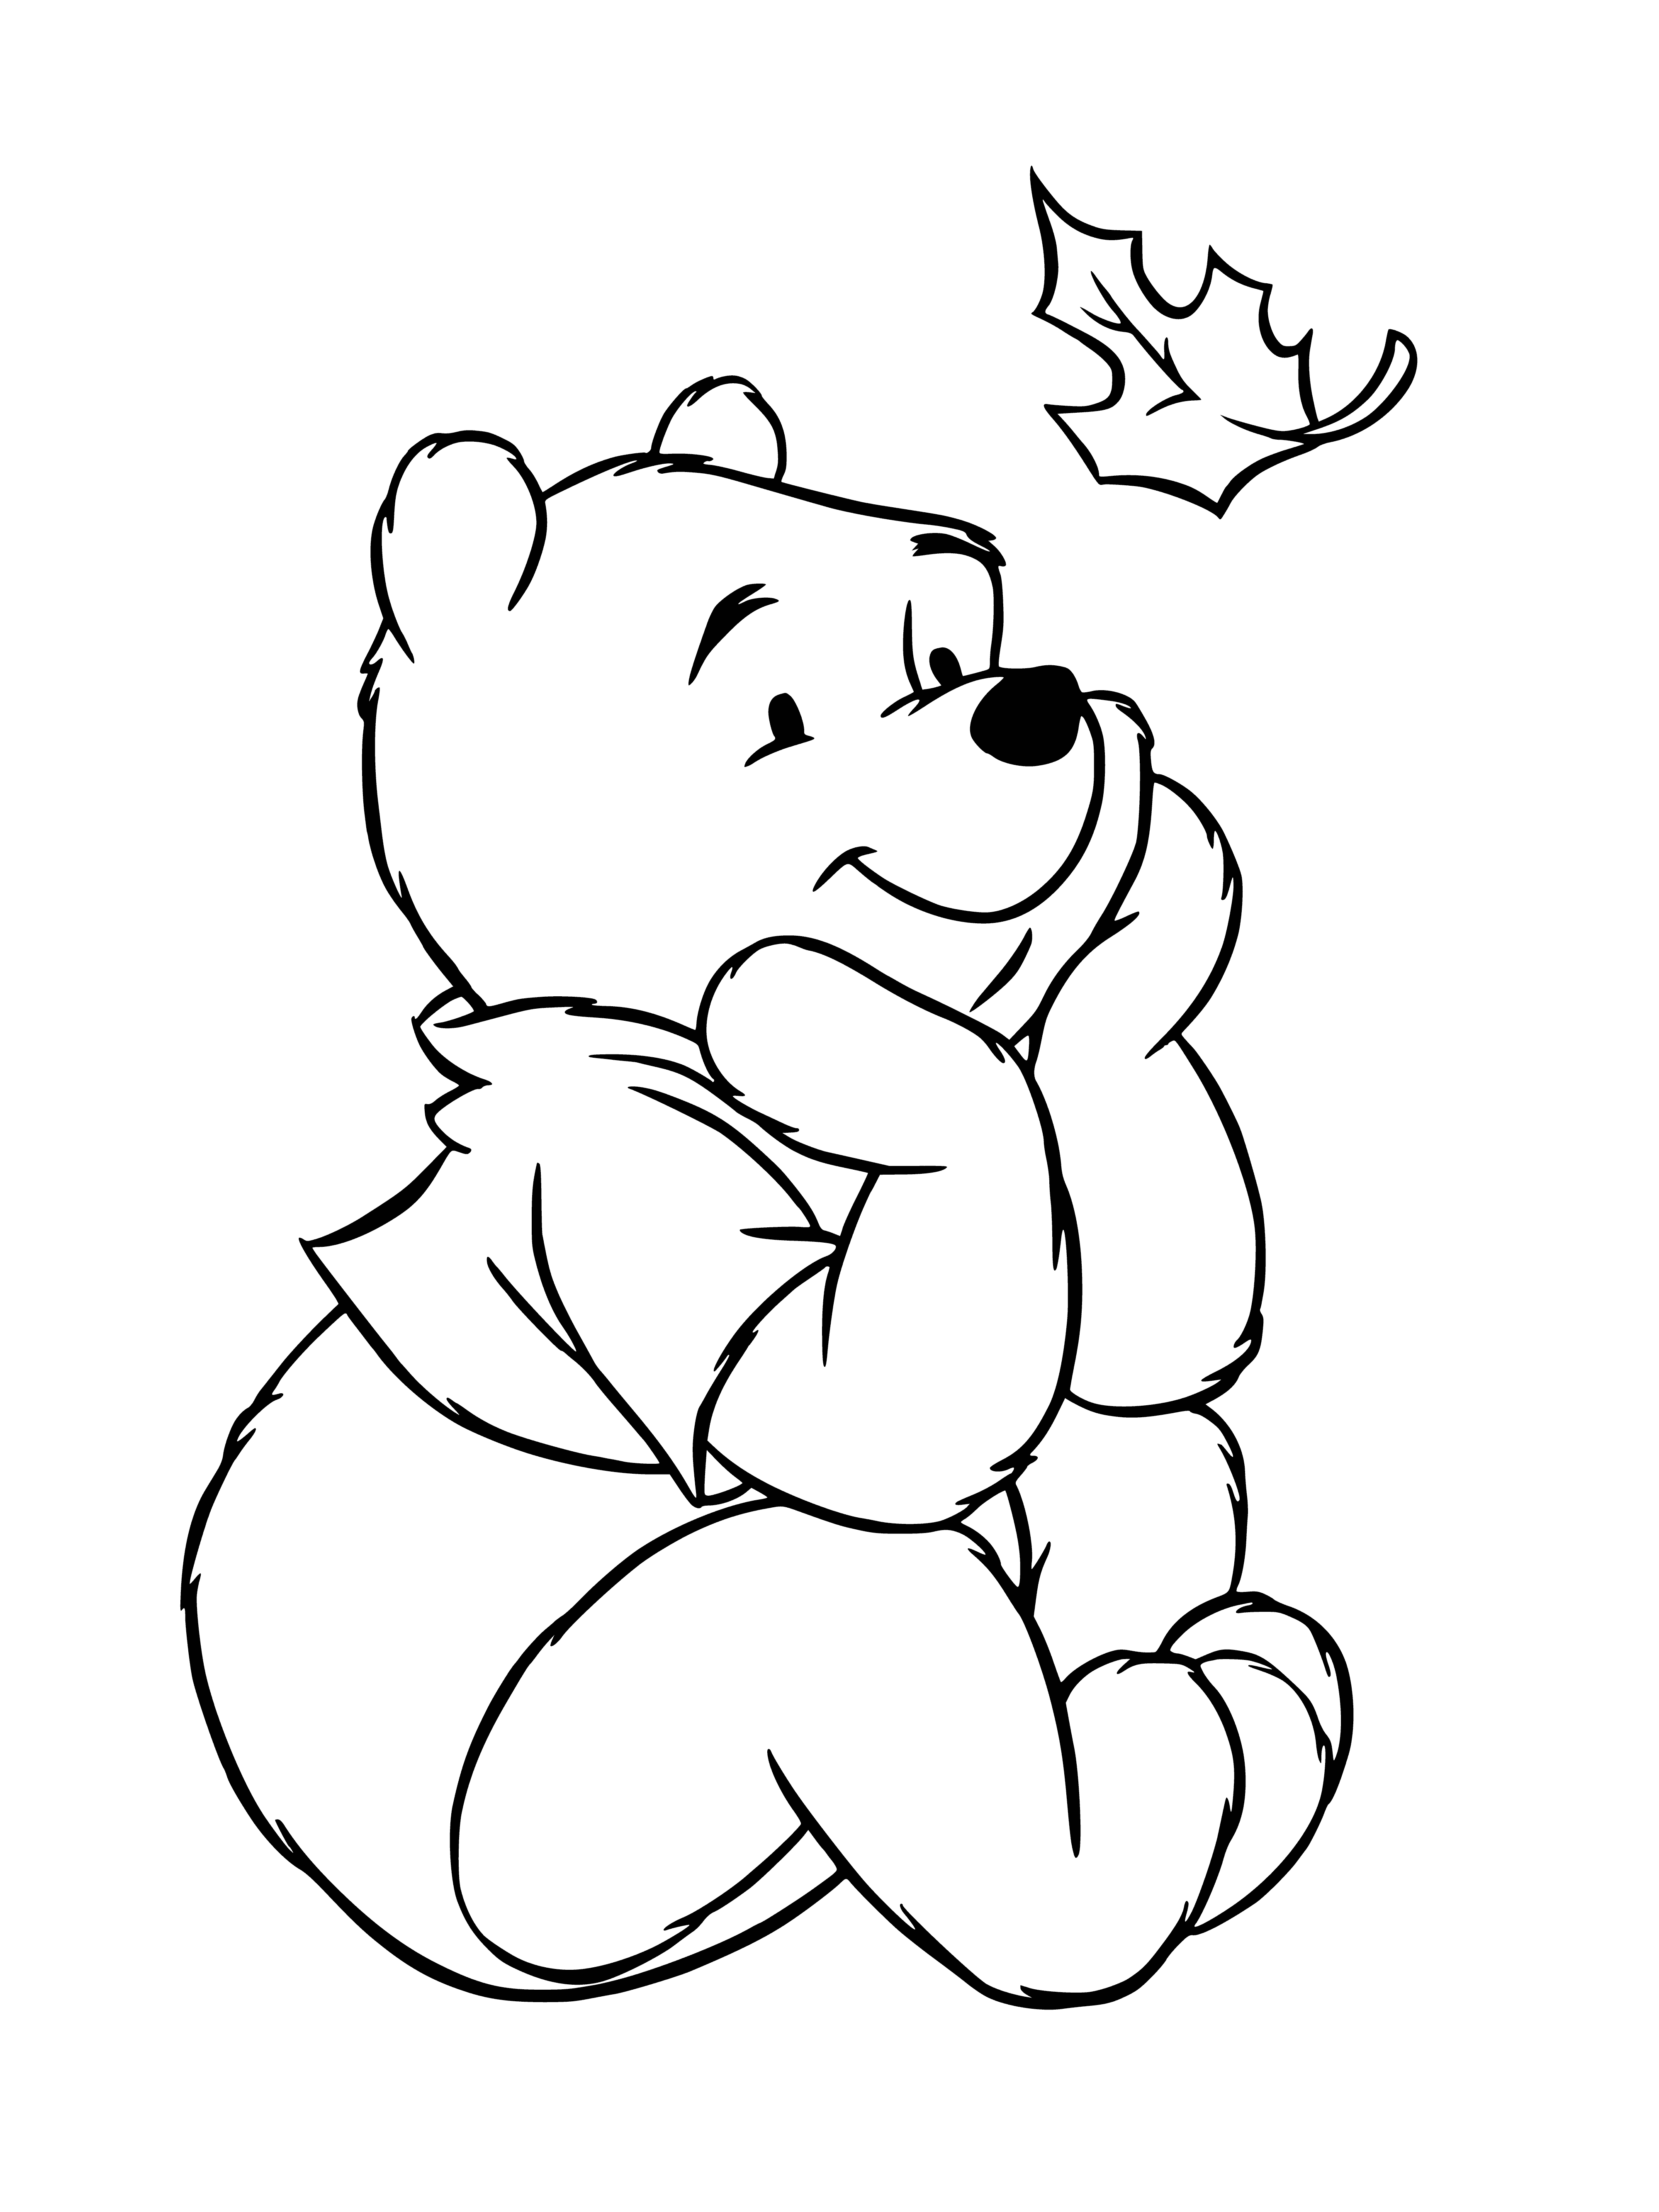 coloring page: Winnie the Pooh with an arm wrapped around a tree, smiling at a leaf in his other hand. #happydays